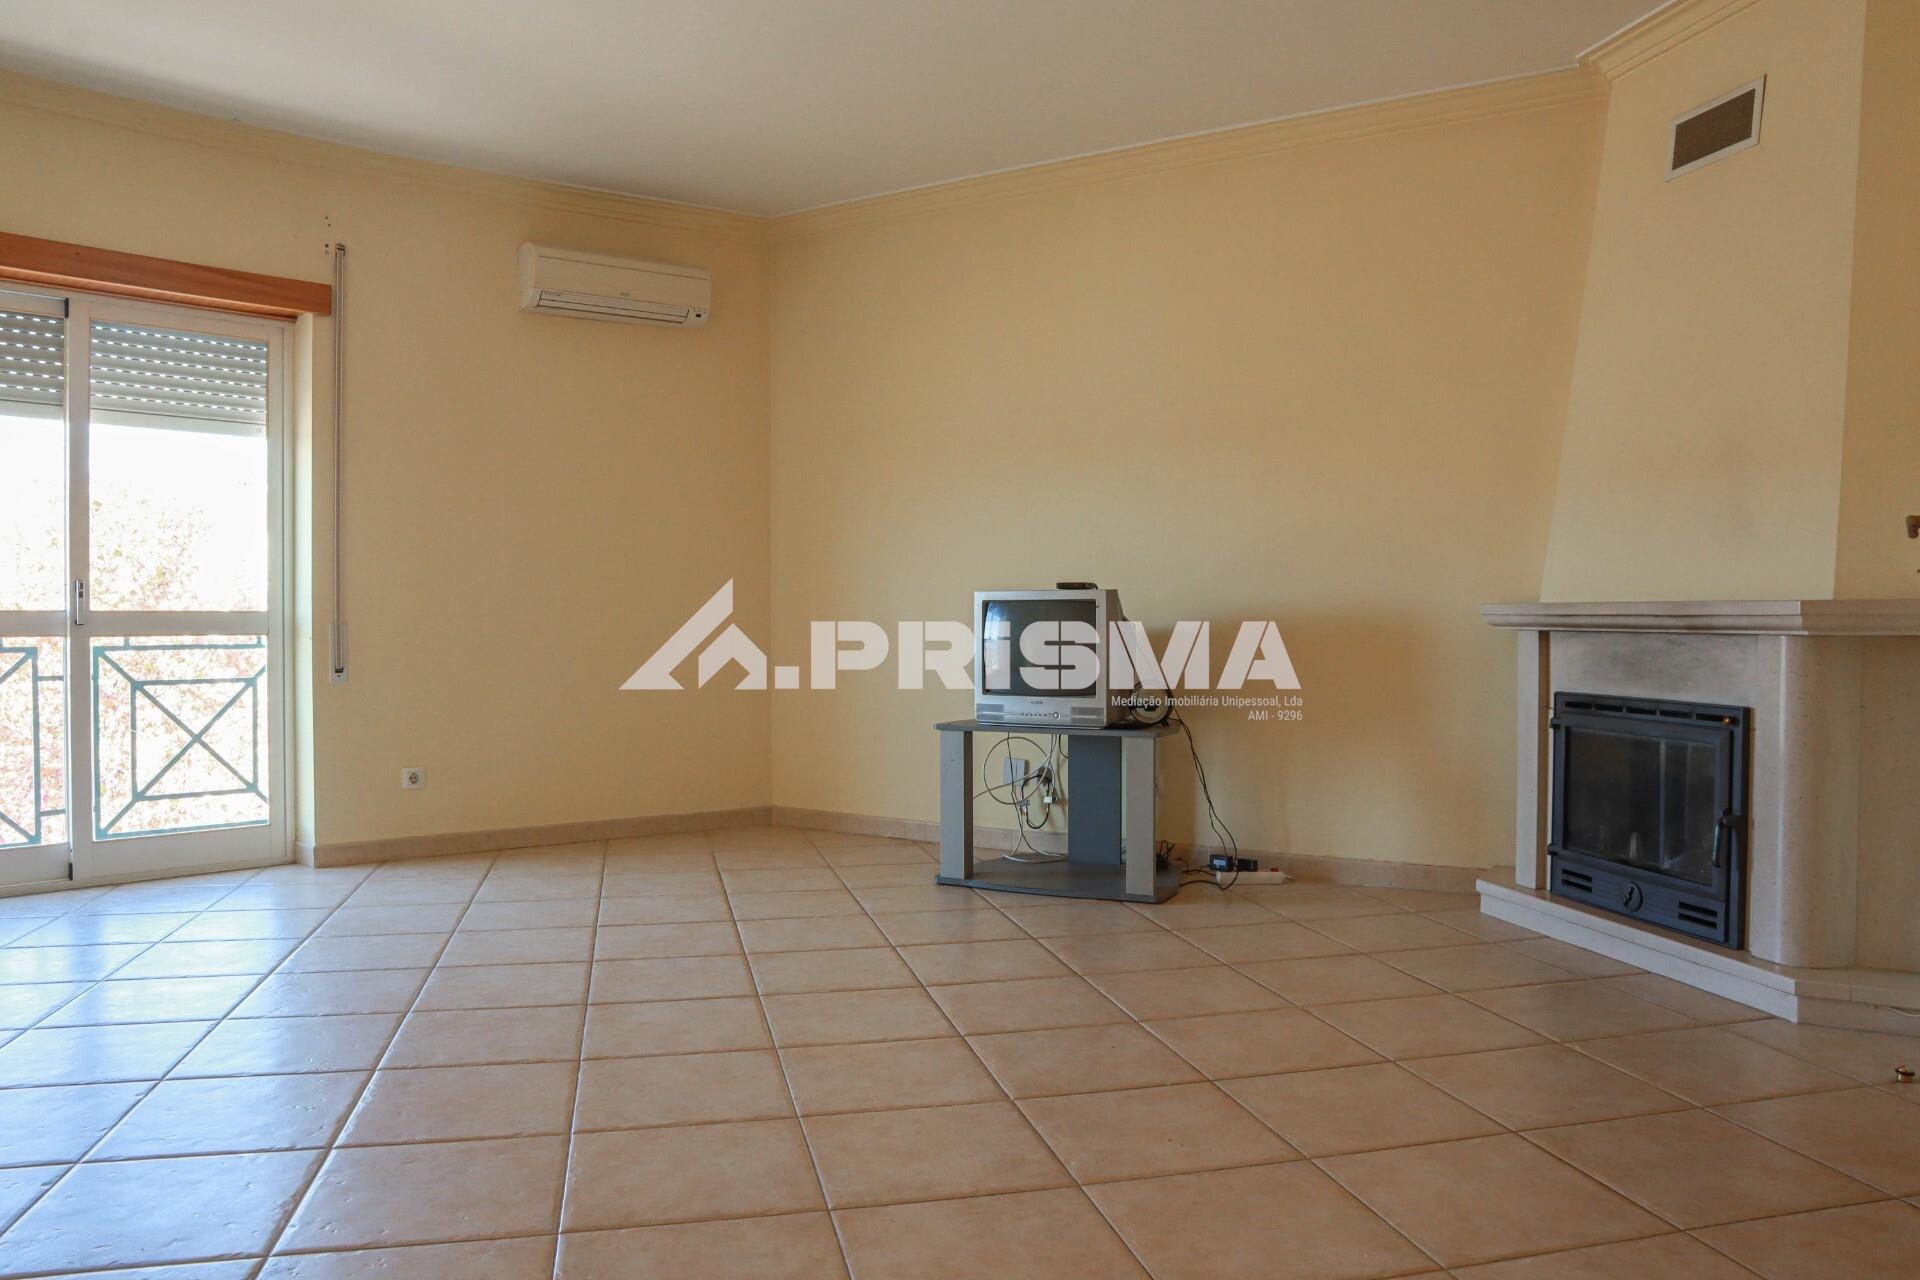 Magnificent 3 bedroom apartment with garage for sale in Castelo Branco